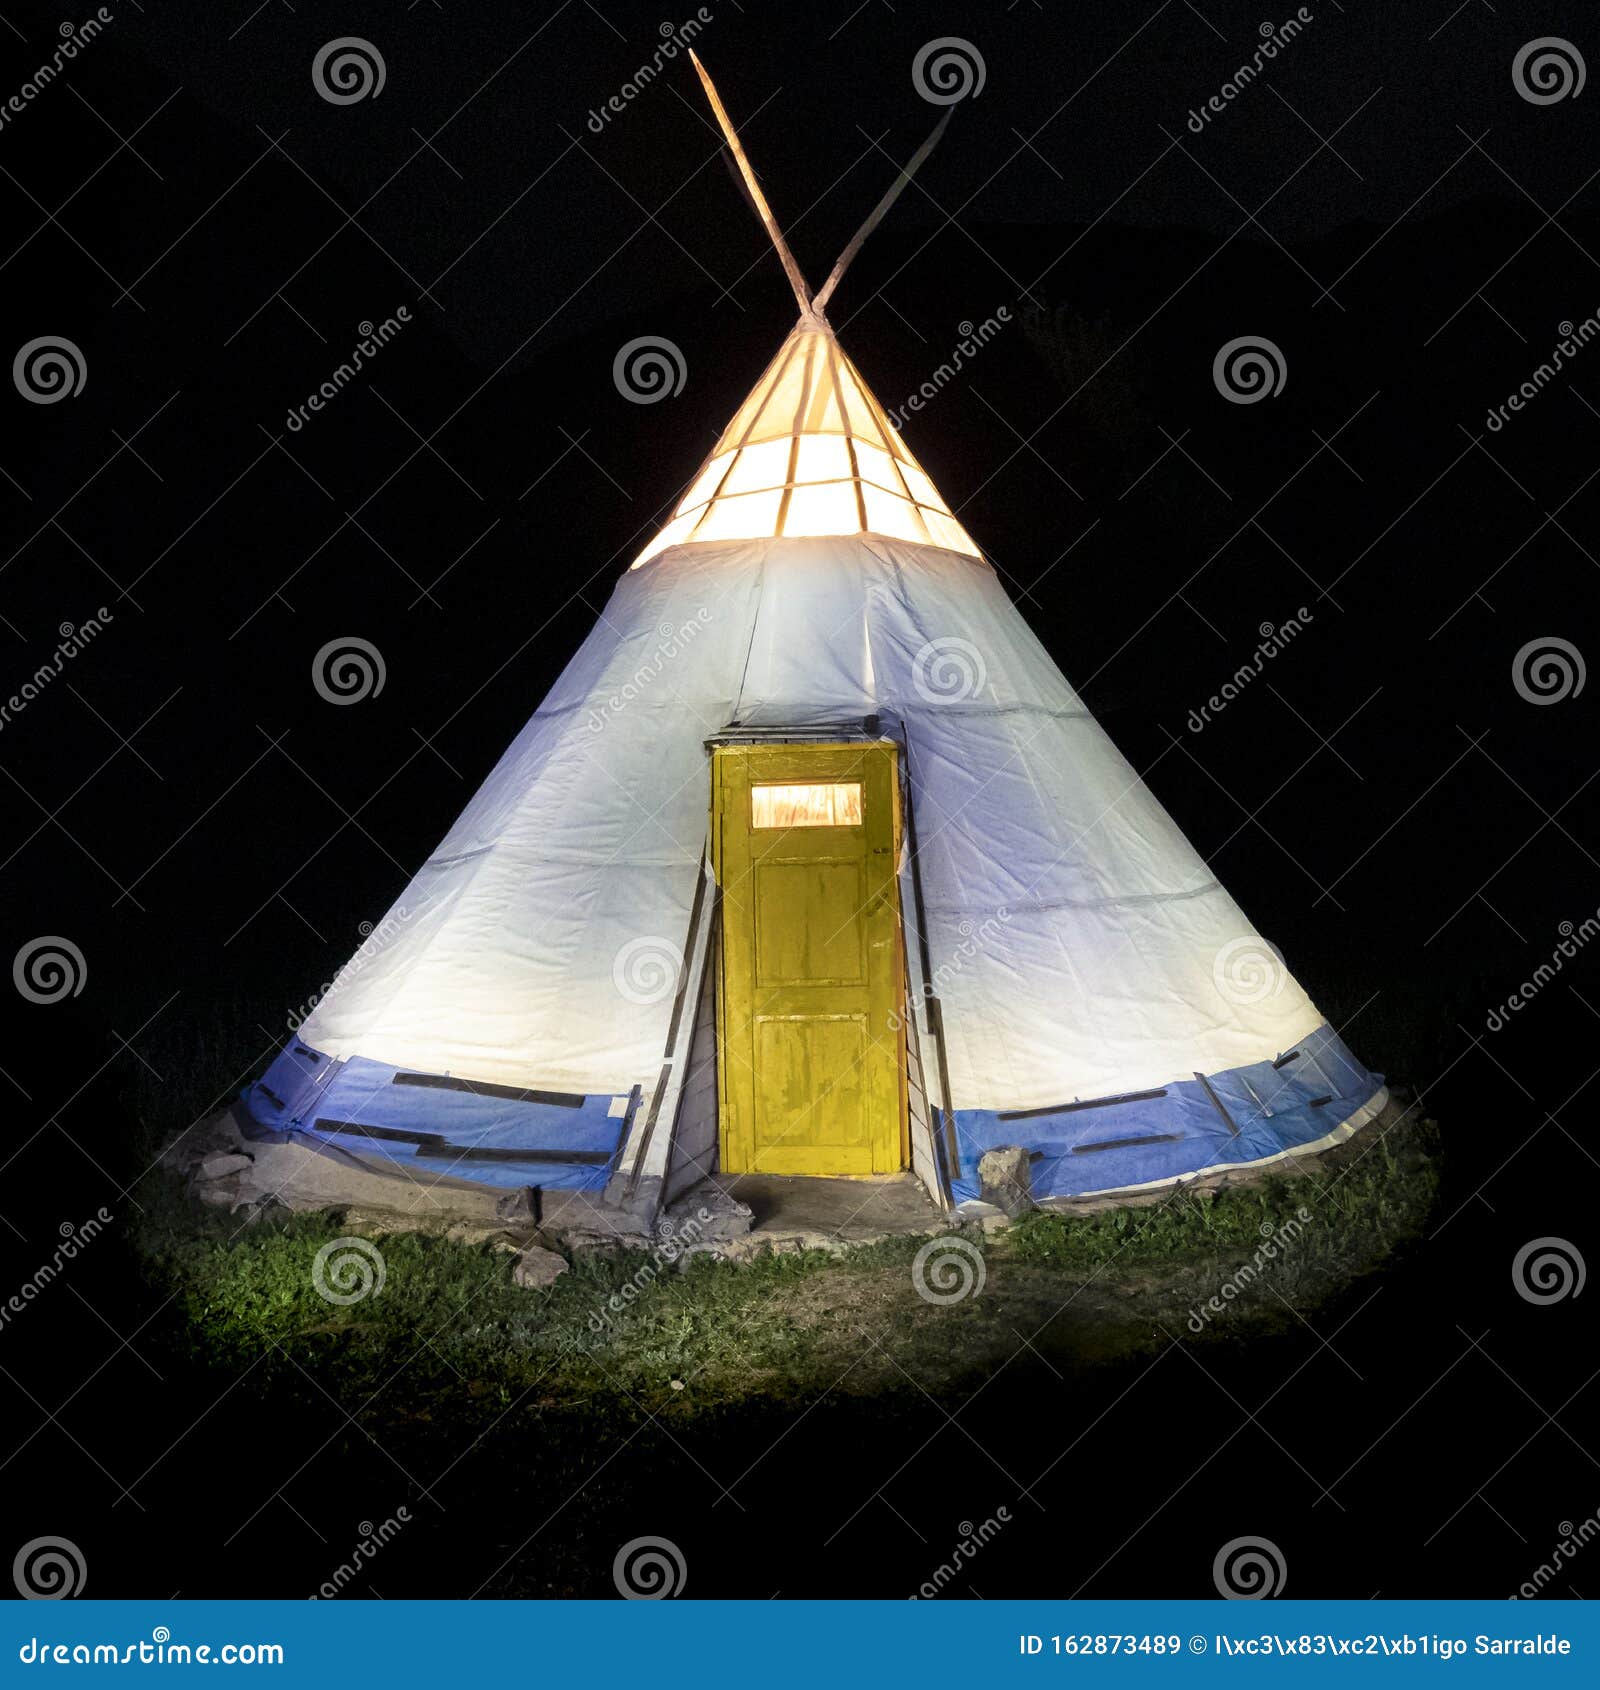 All 93+ Images mongolian teepee in the middle of nowhere Latest